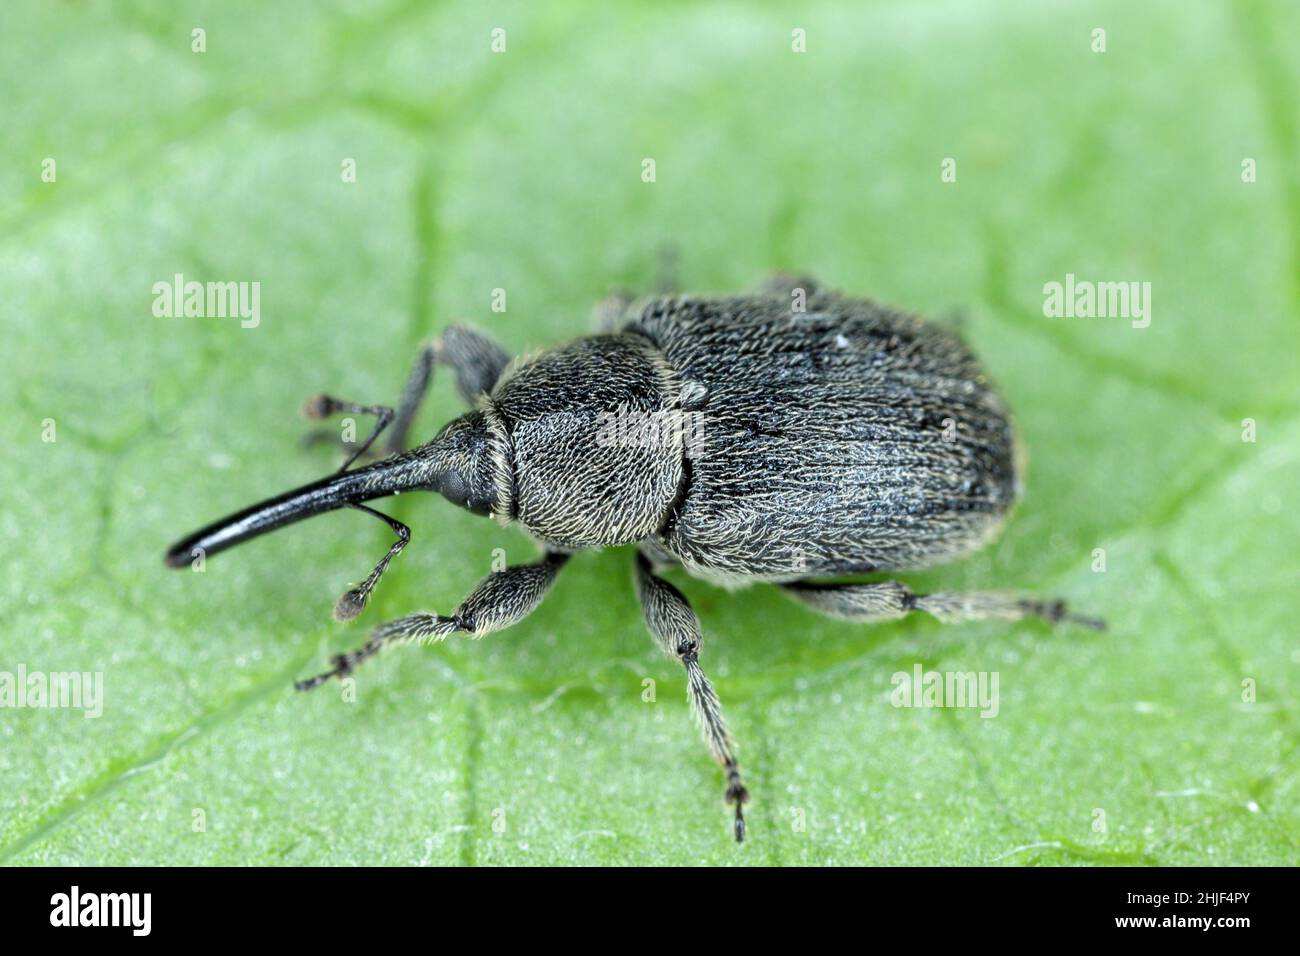 animal, antenna, background, beautiful, beauty, beetle, black, blue, branch, bug, close up, closeup, coleoptera, copy space, critter, curculionidae, d Stock Photo